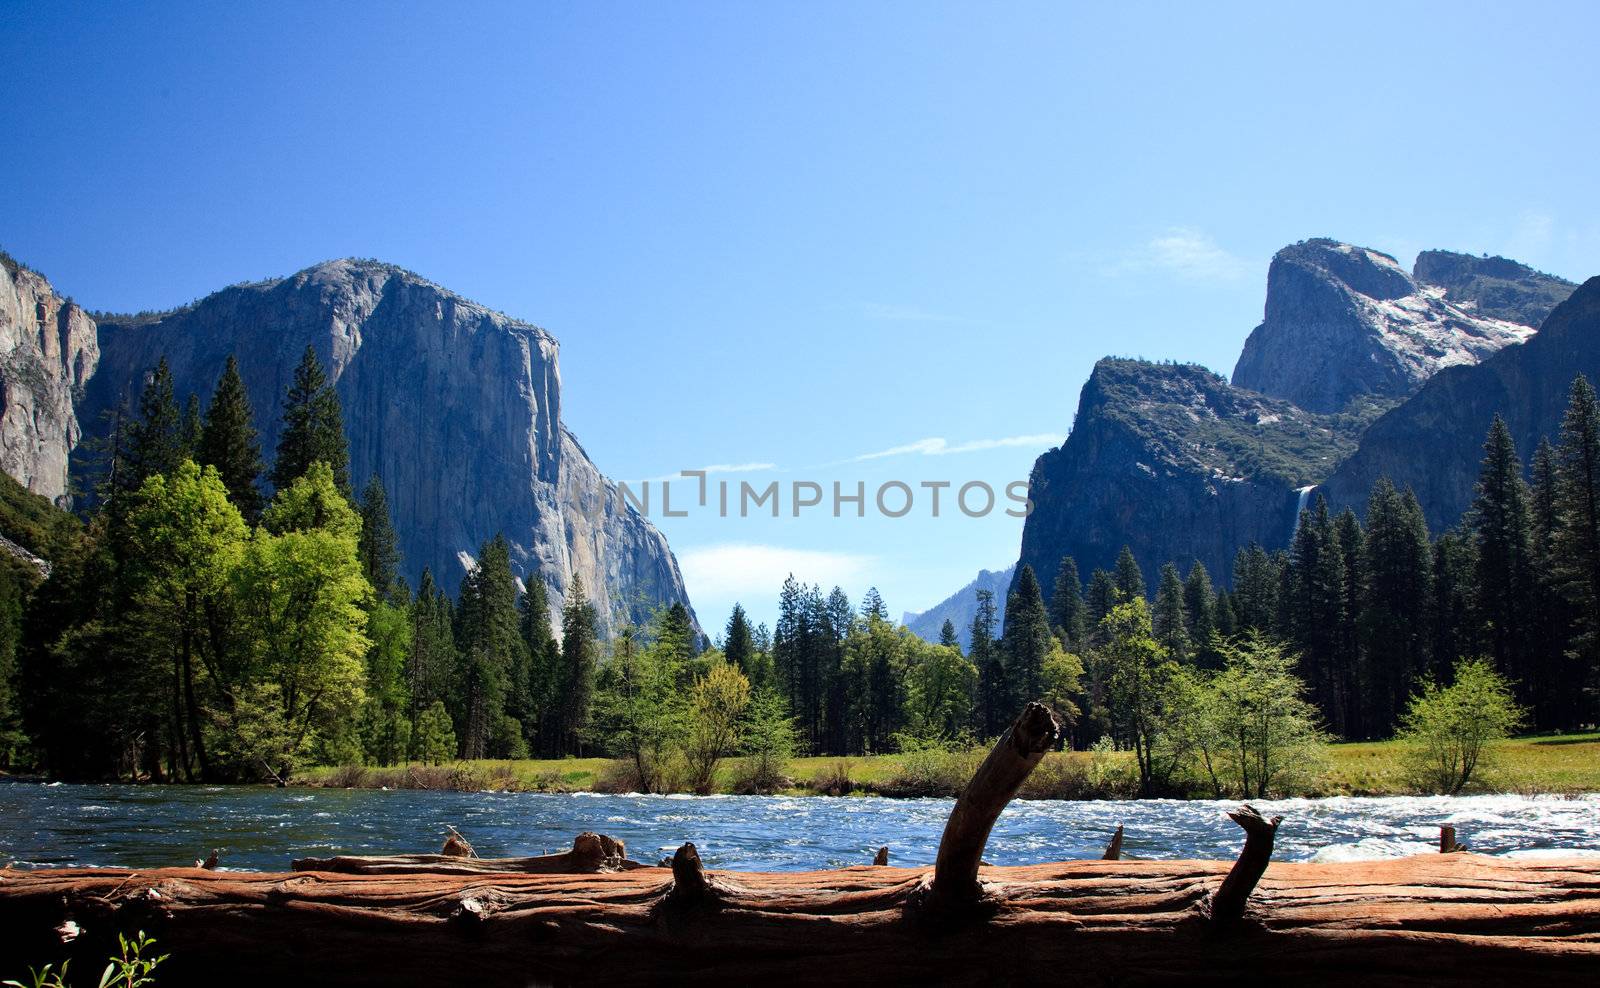 View into Yosemite Valley from Merced River by steheap